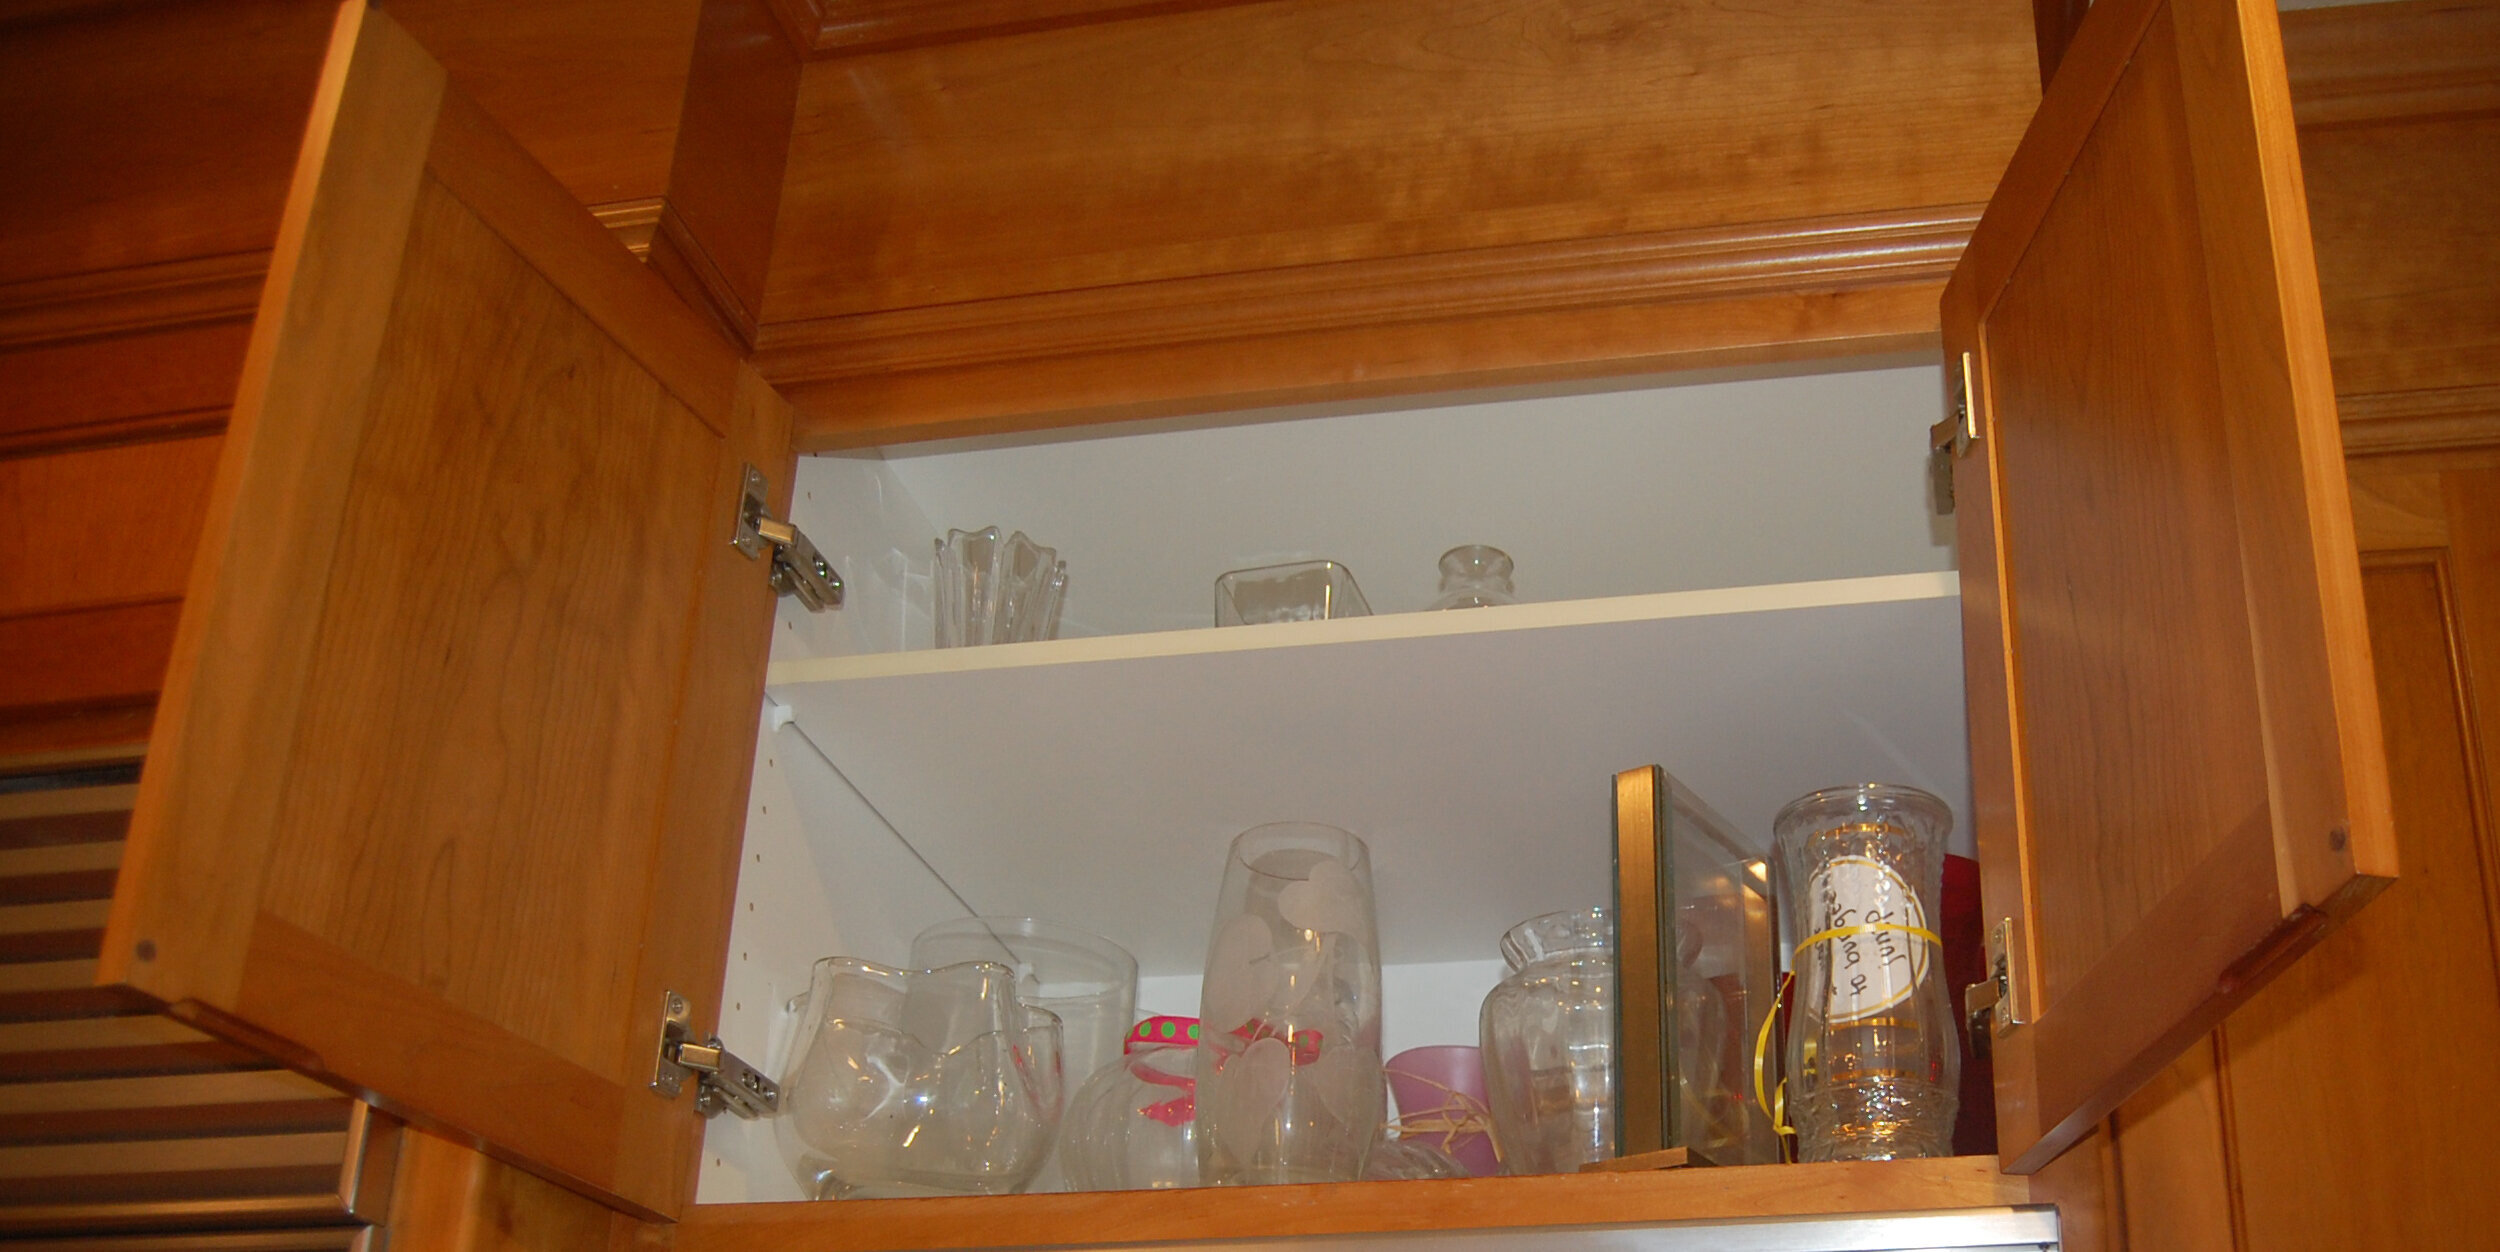 Store vases and sentimental items up high